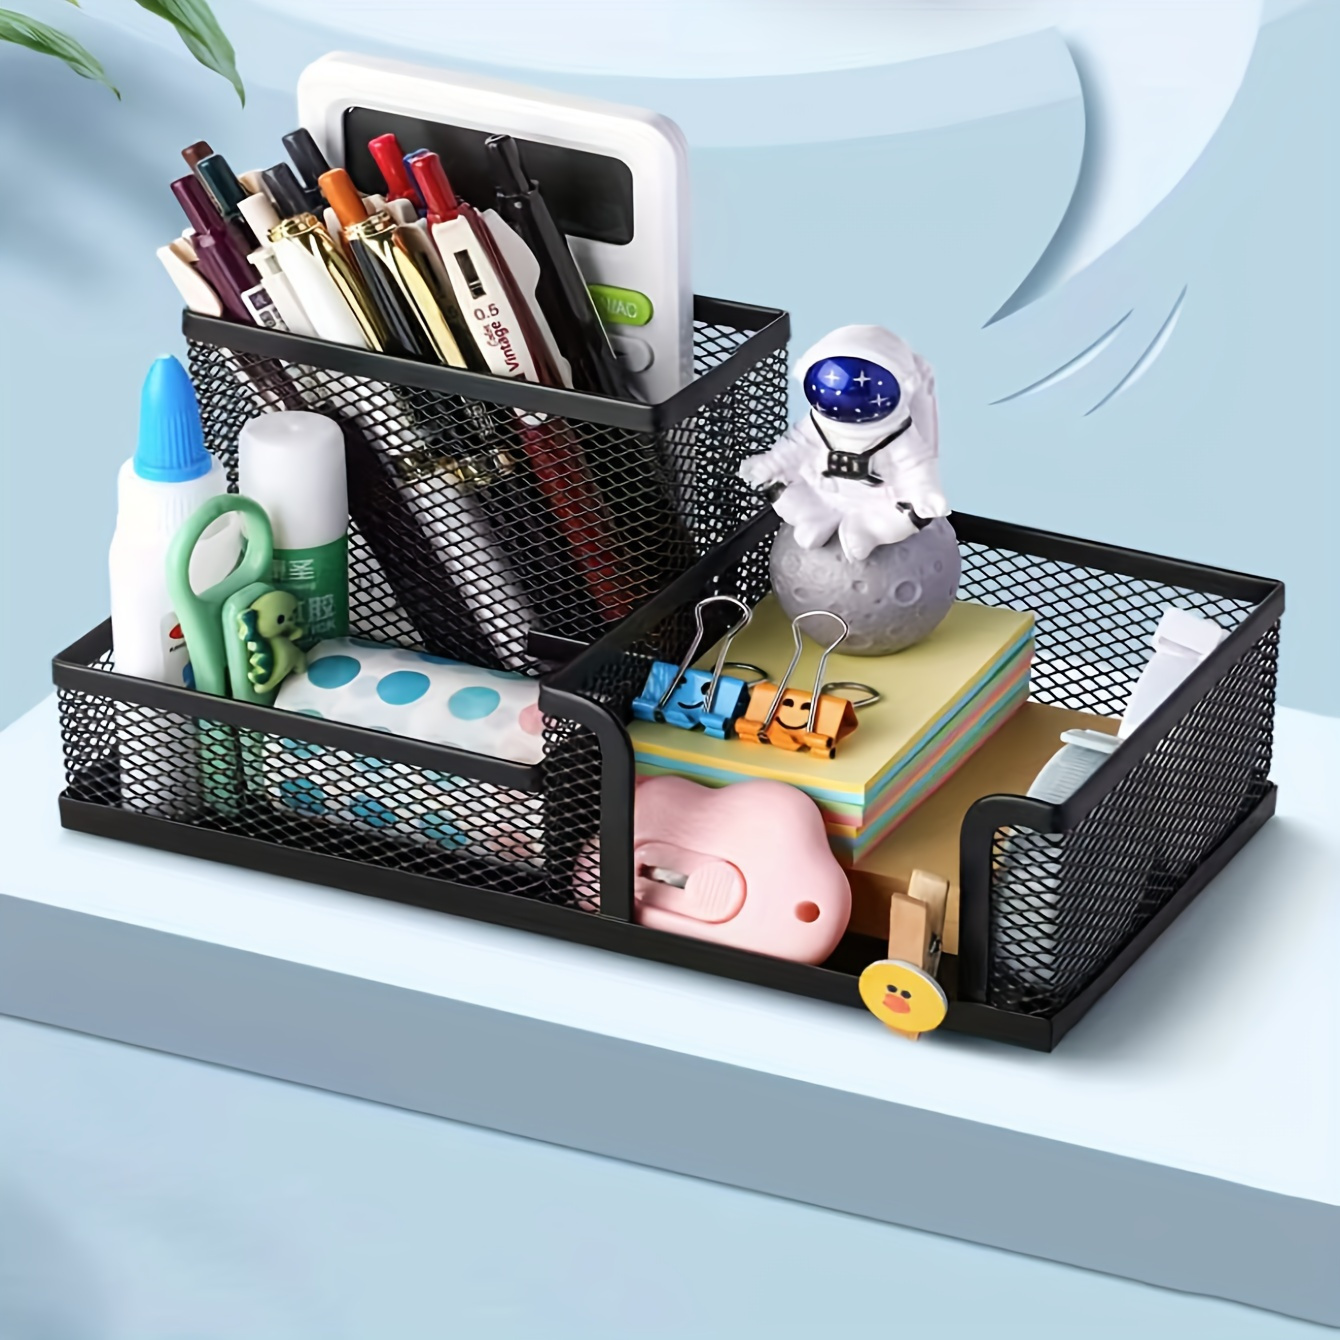 

1pc Multi-functional Desk Organizer, Mesh Metal Pen Holder, Stationery Container Storage For Home Office Storage Accrssories, Easy To Organize Store